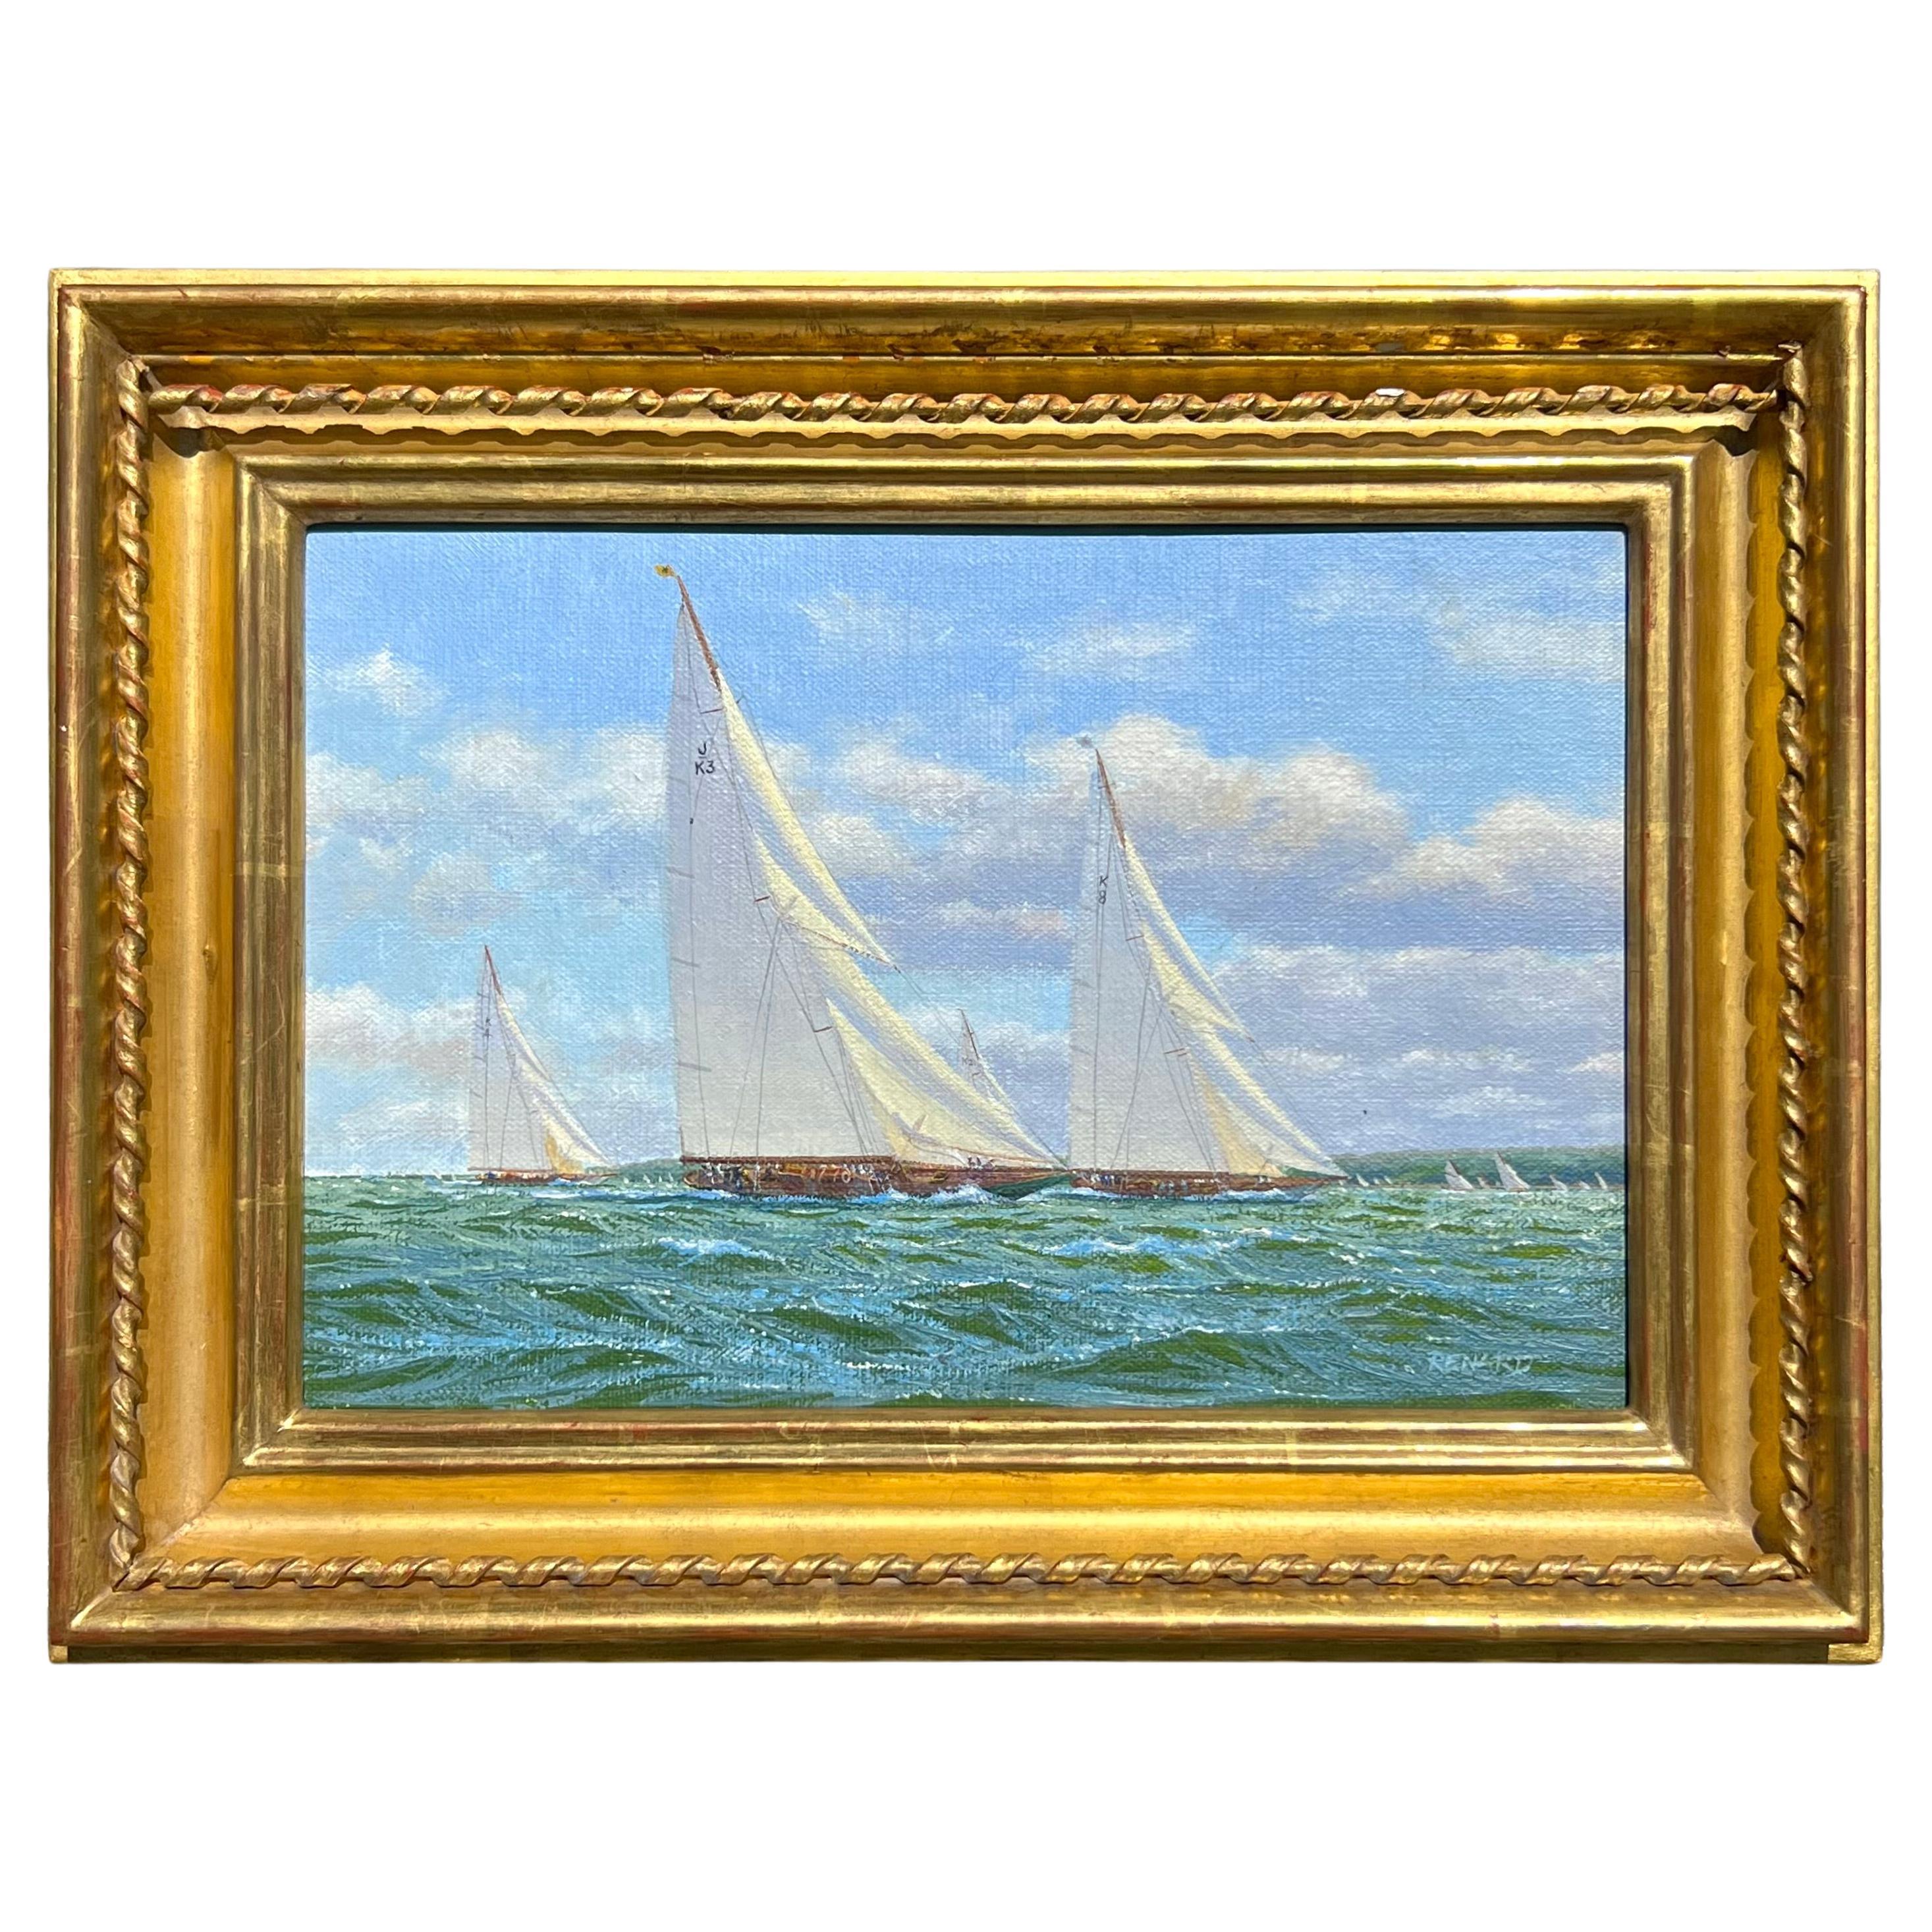 "Yachts Racing off the Coast" an Oil Painting by Stephen Renard